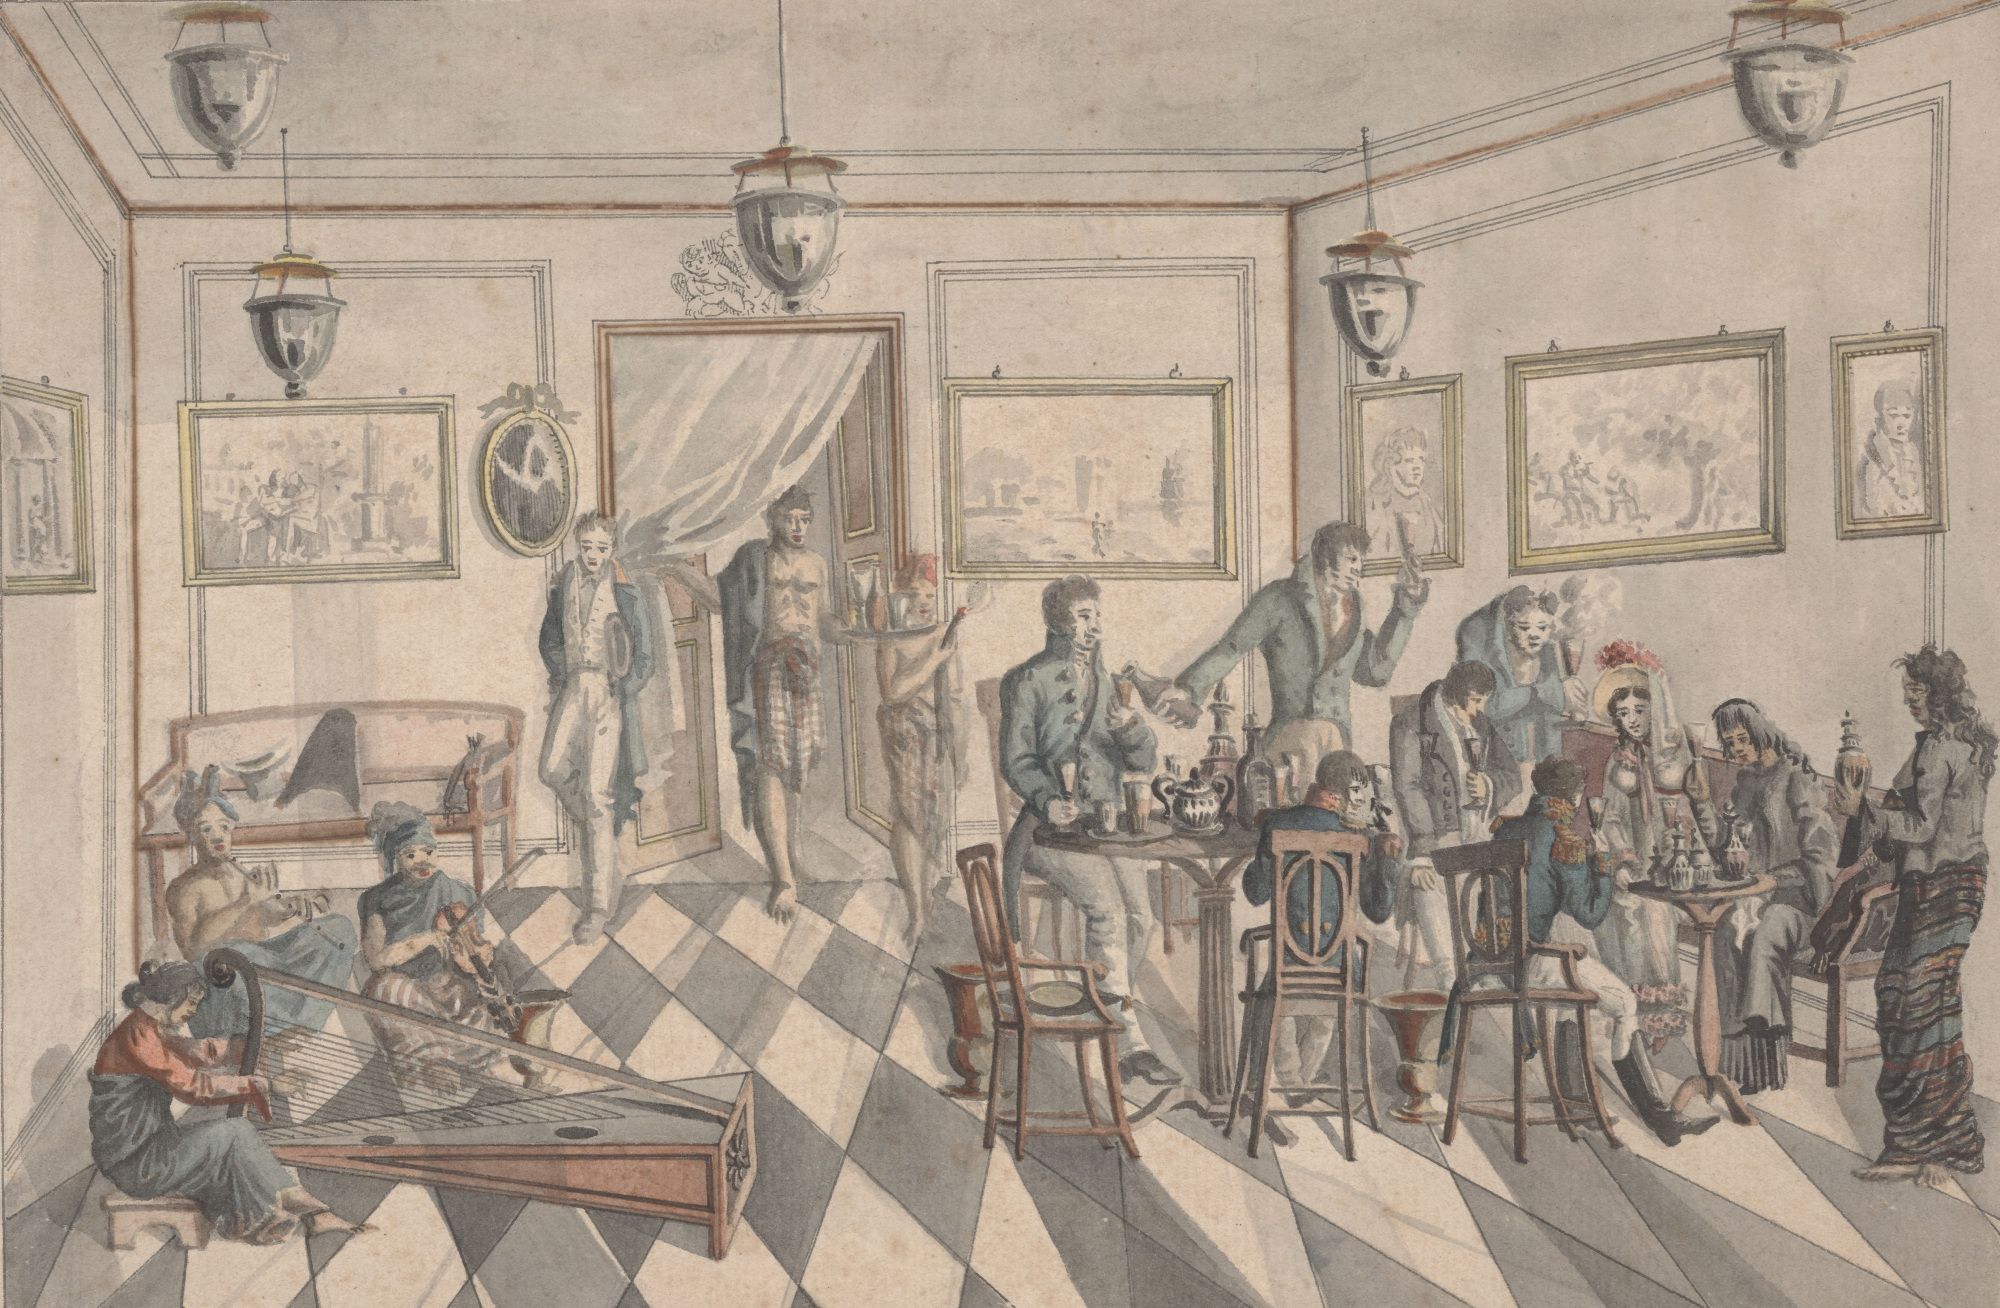 A watercolour painting of a group crowded around a table, servers bringing food, and a trio of musicians playing in a corner of the room